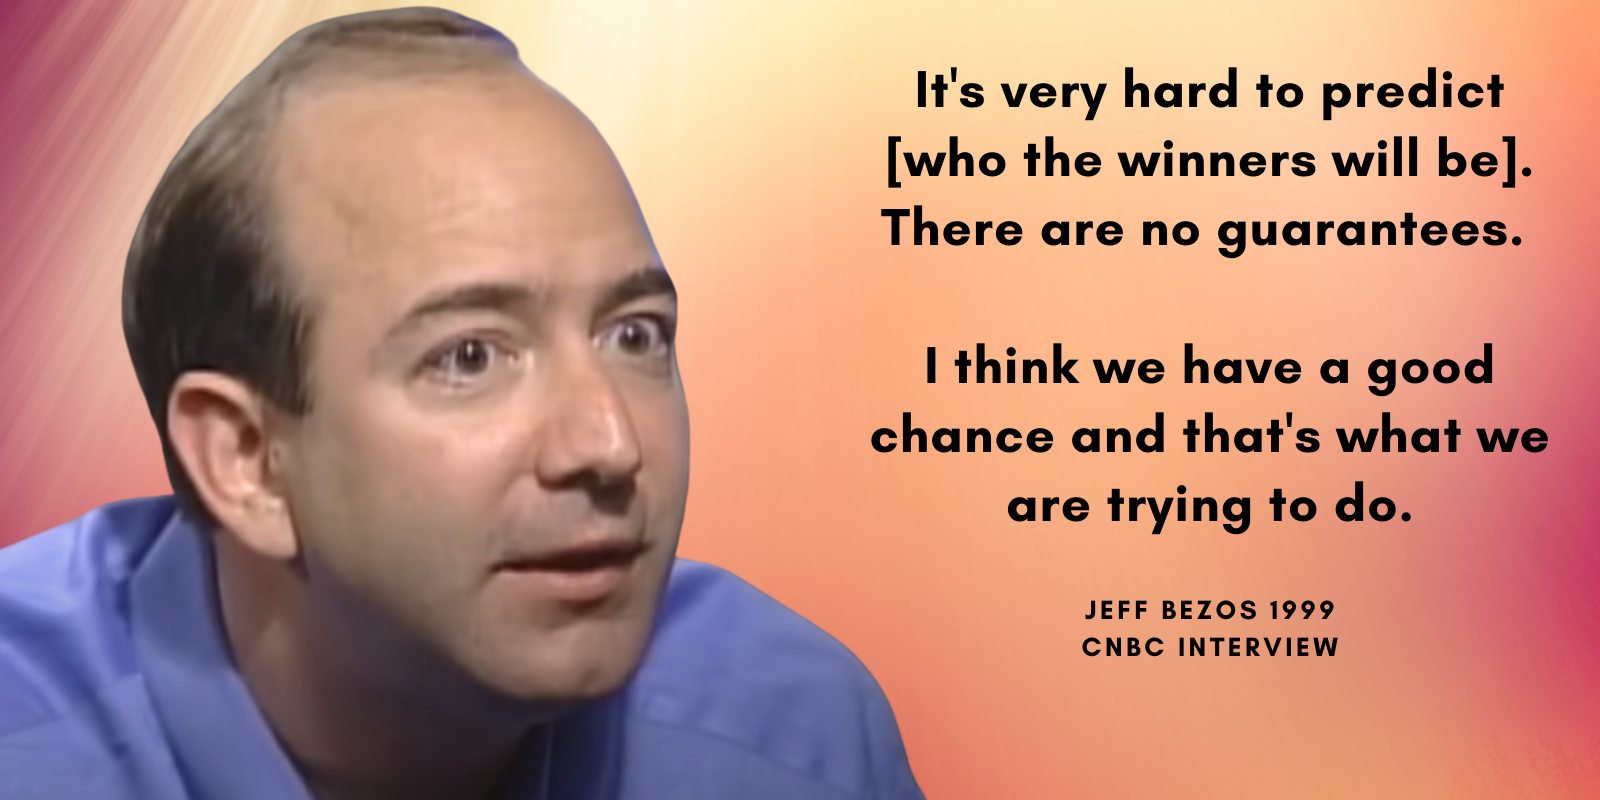 “It’s very hard to predict [who the winners will be]. There are no guarantees.” Jeff Bezos Quote